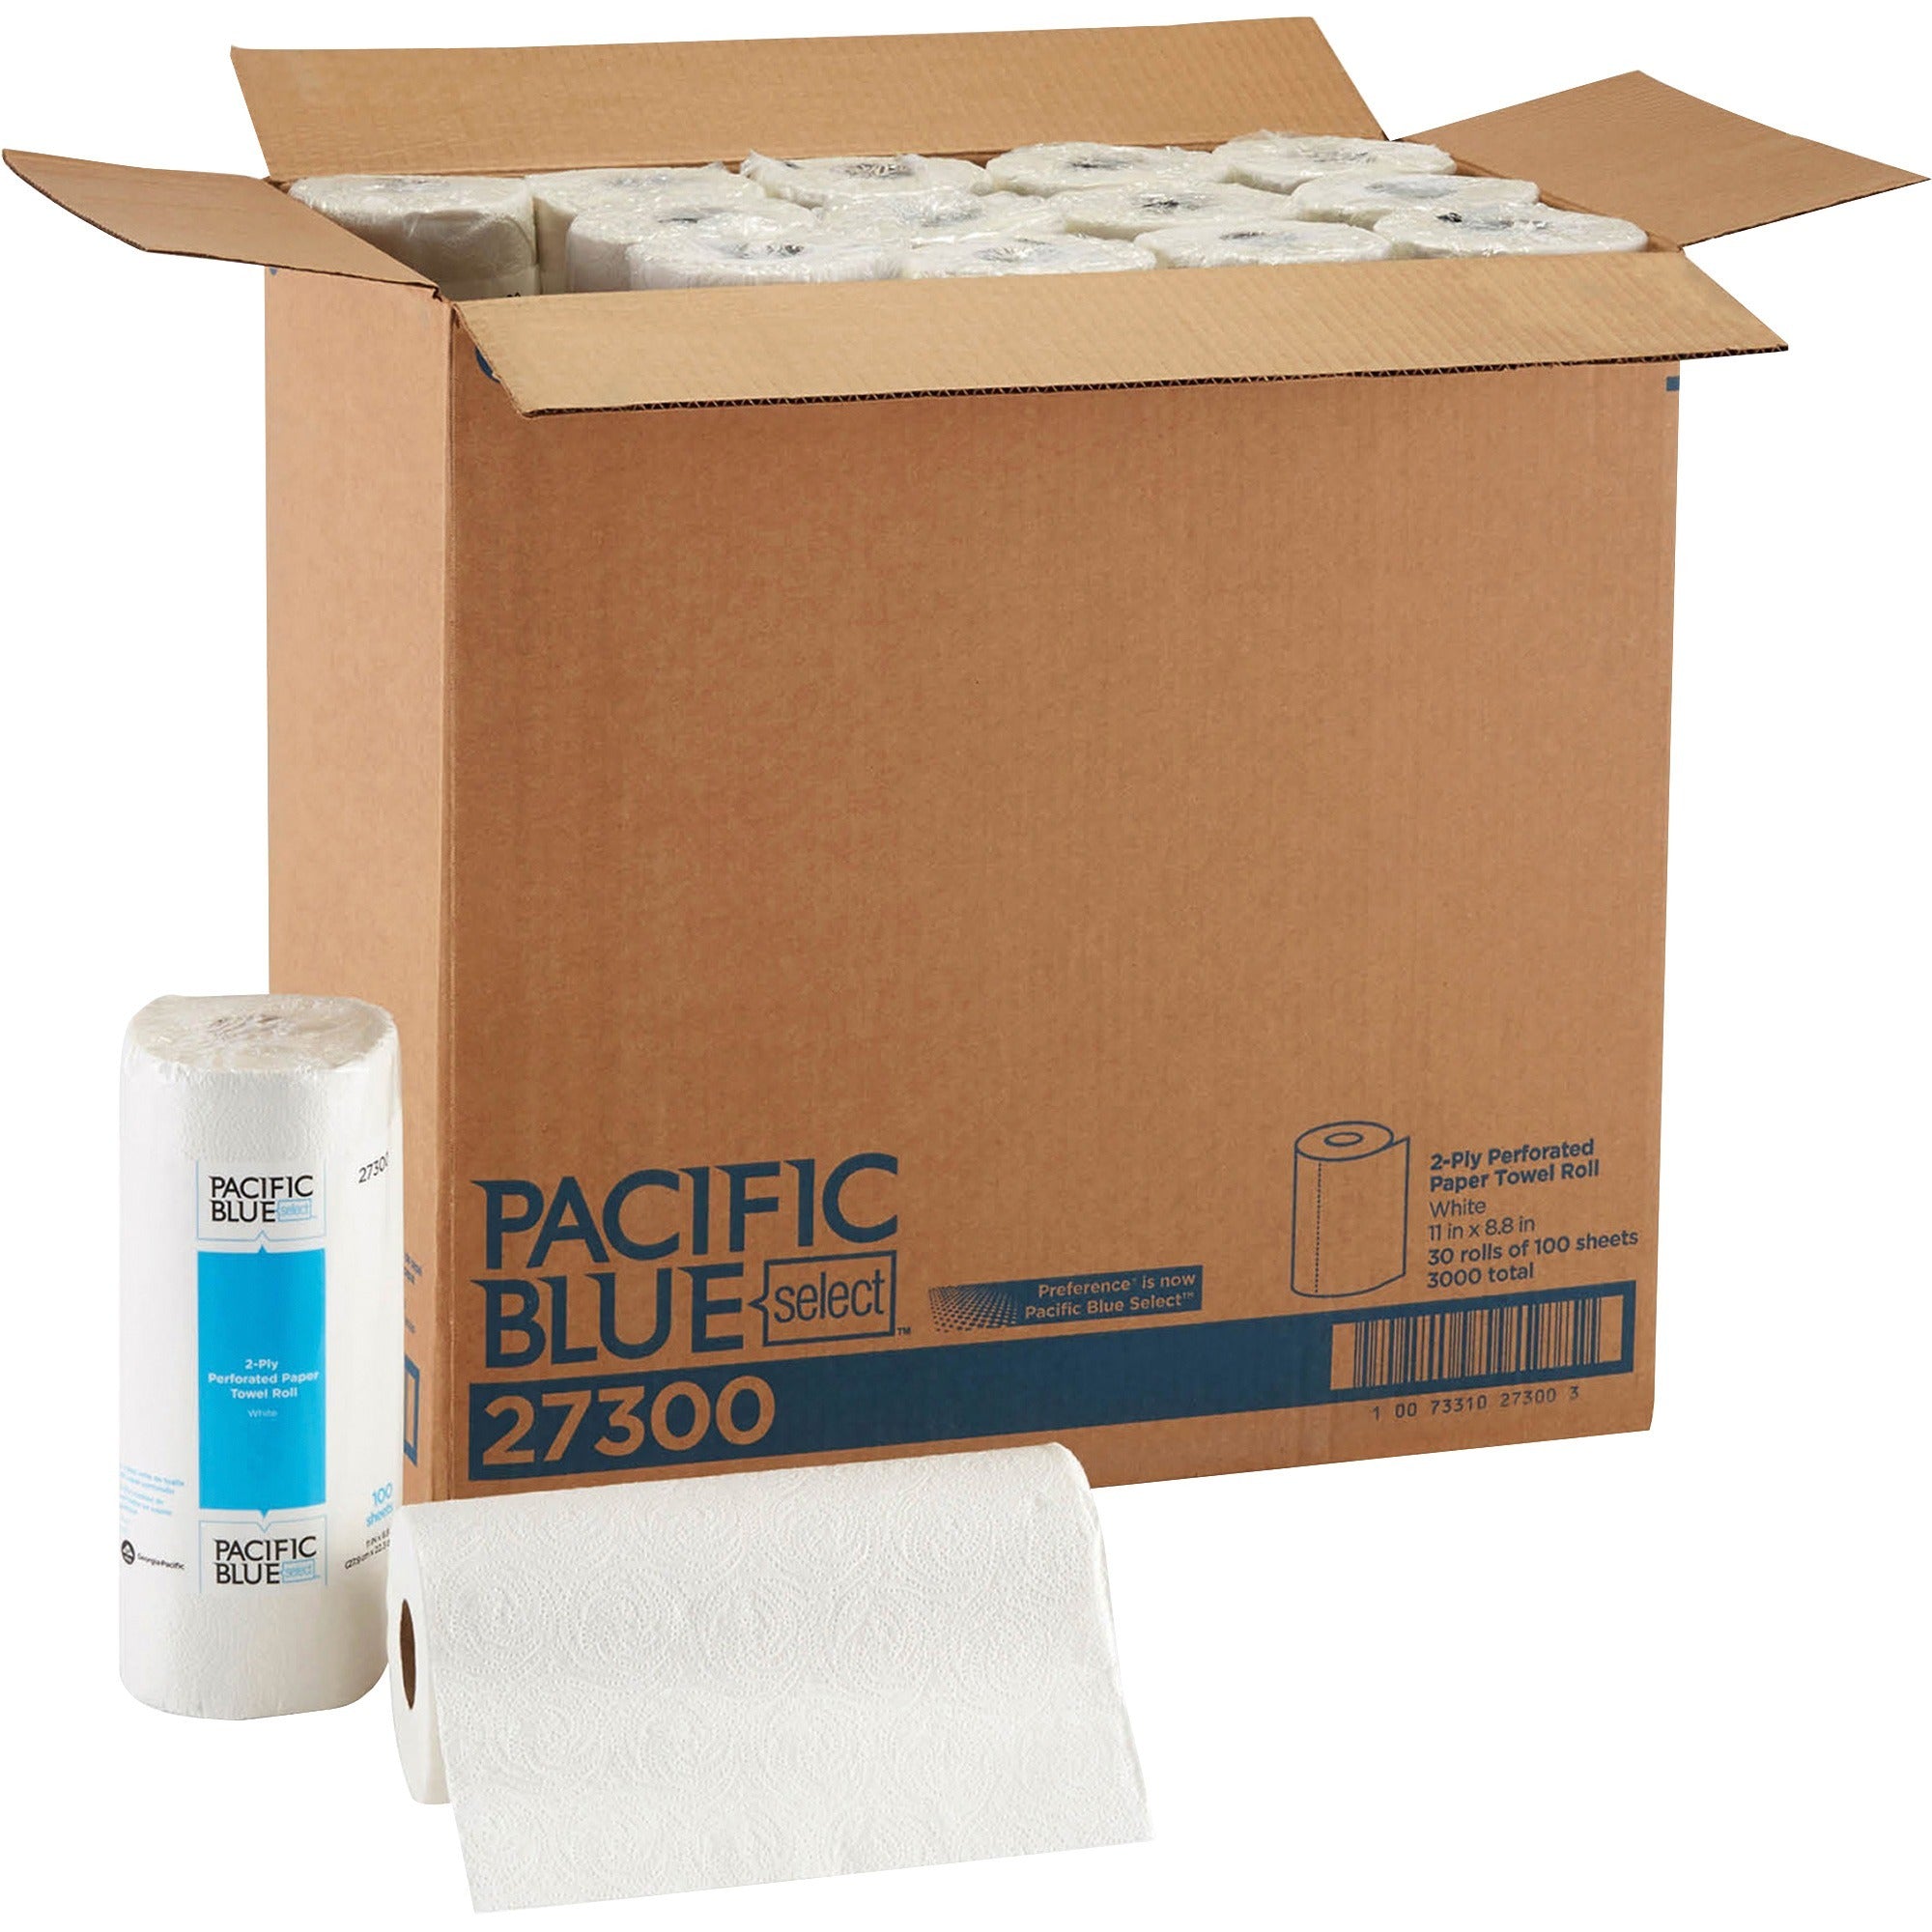 pacific-blue-select-paper-towel-rolls-by-gp-pro-2-ply-11-x-880-100-sheets-roll-480-roll-diameter-163-core-white-paper-perforated-strong-absorbent-for-food-service-multipurpose-30-rolls-per-carton-1-carton_gpc27300ct - 1